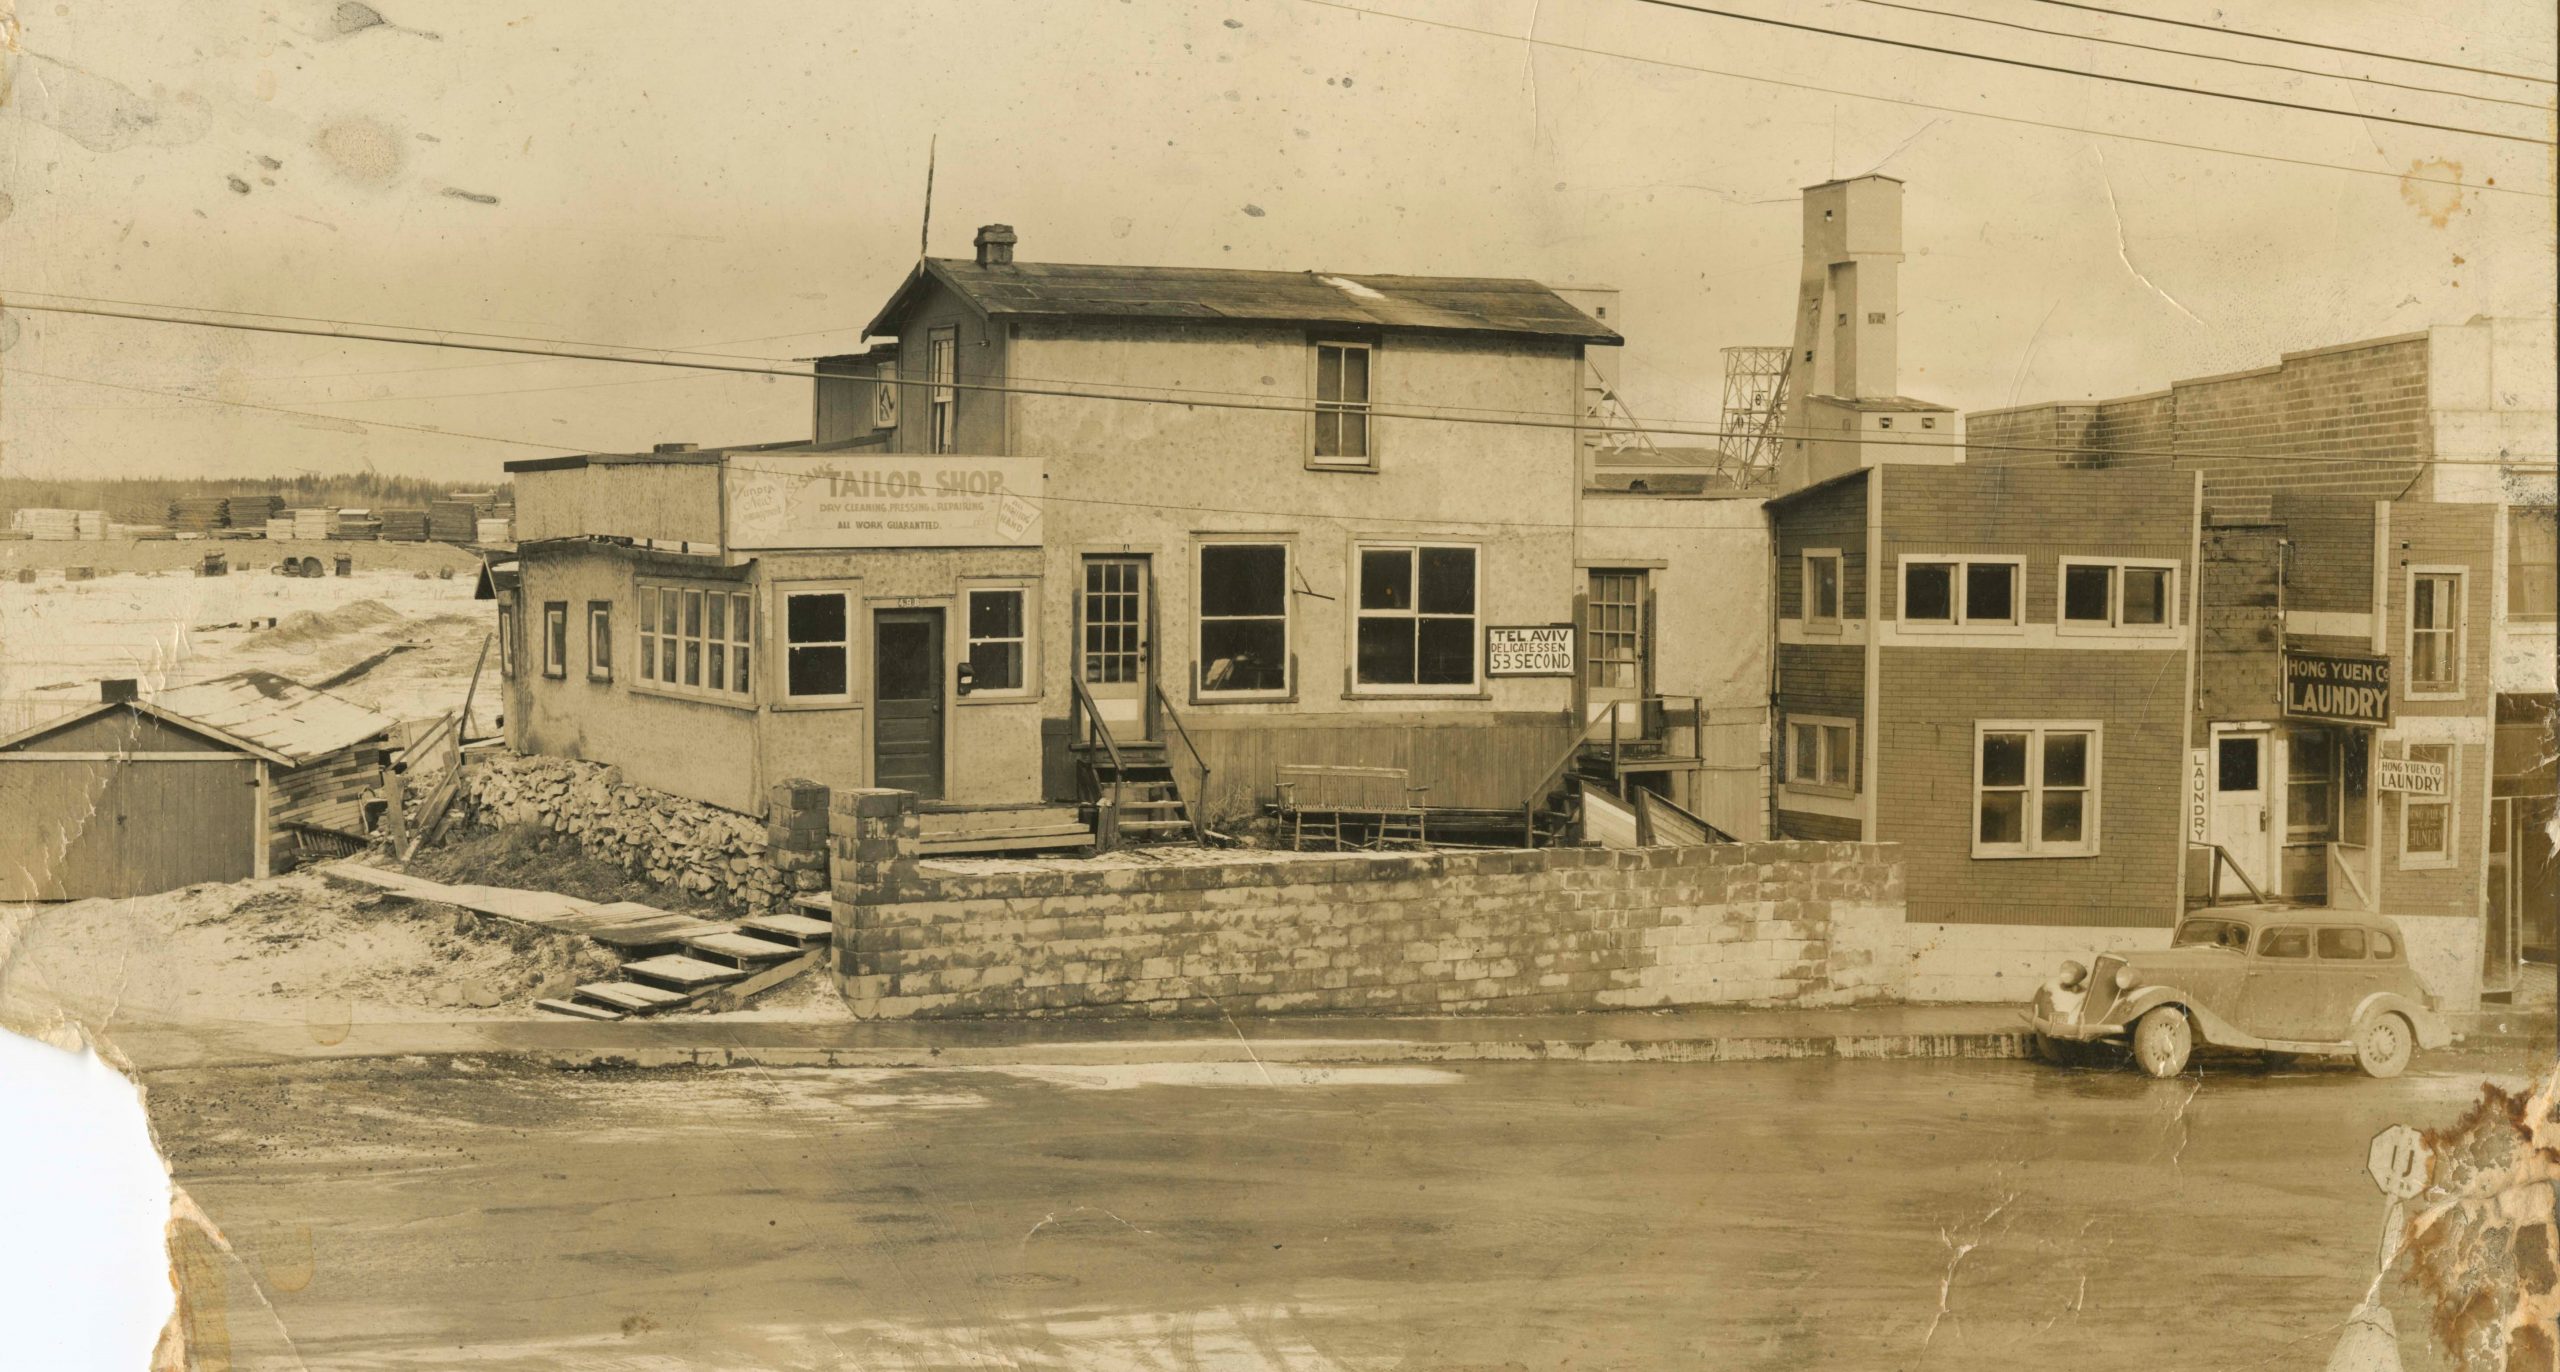 Black and white photograph of a home and businesses on a street with a car parked at the right side of the image. Mine buildings are in the background.